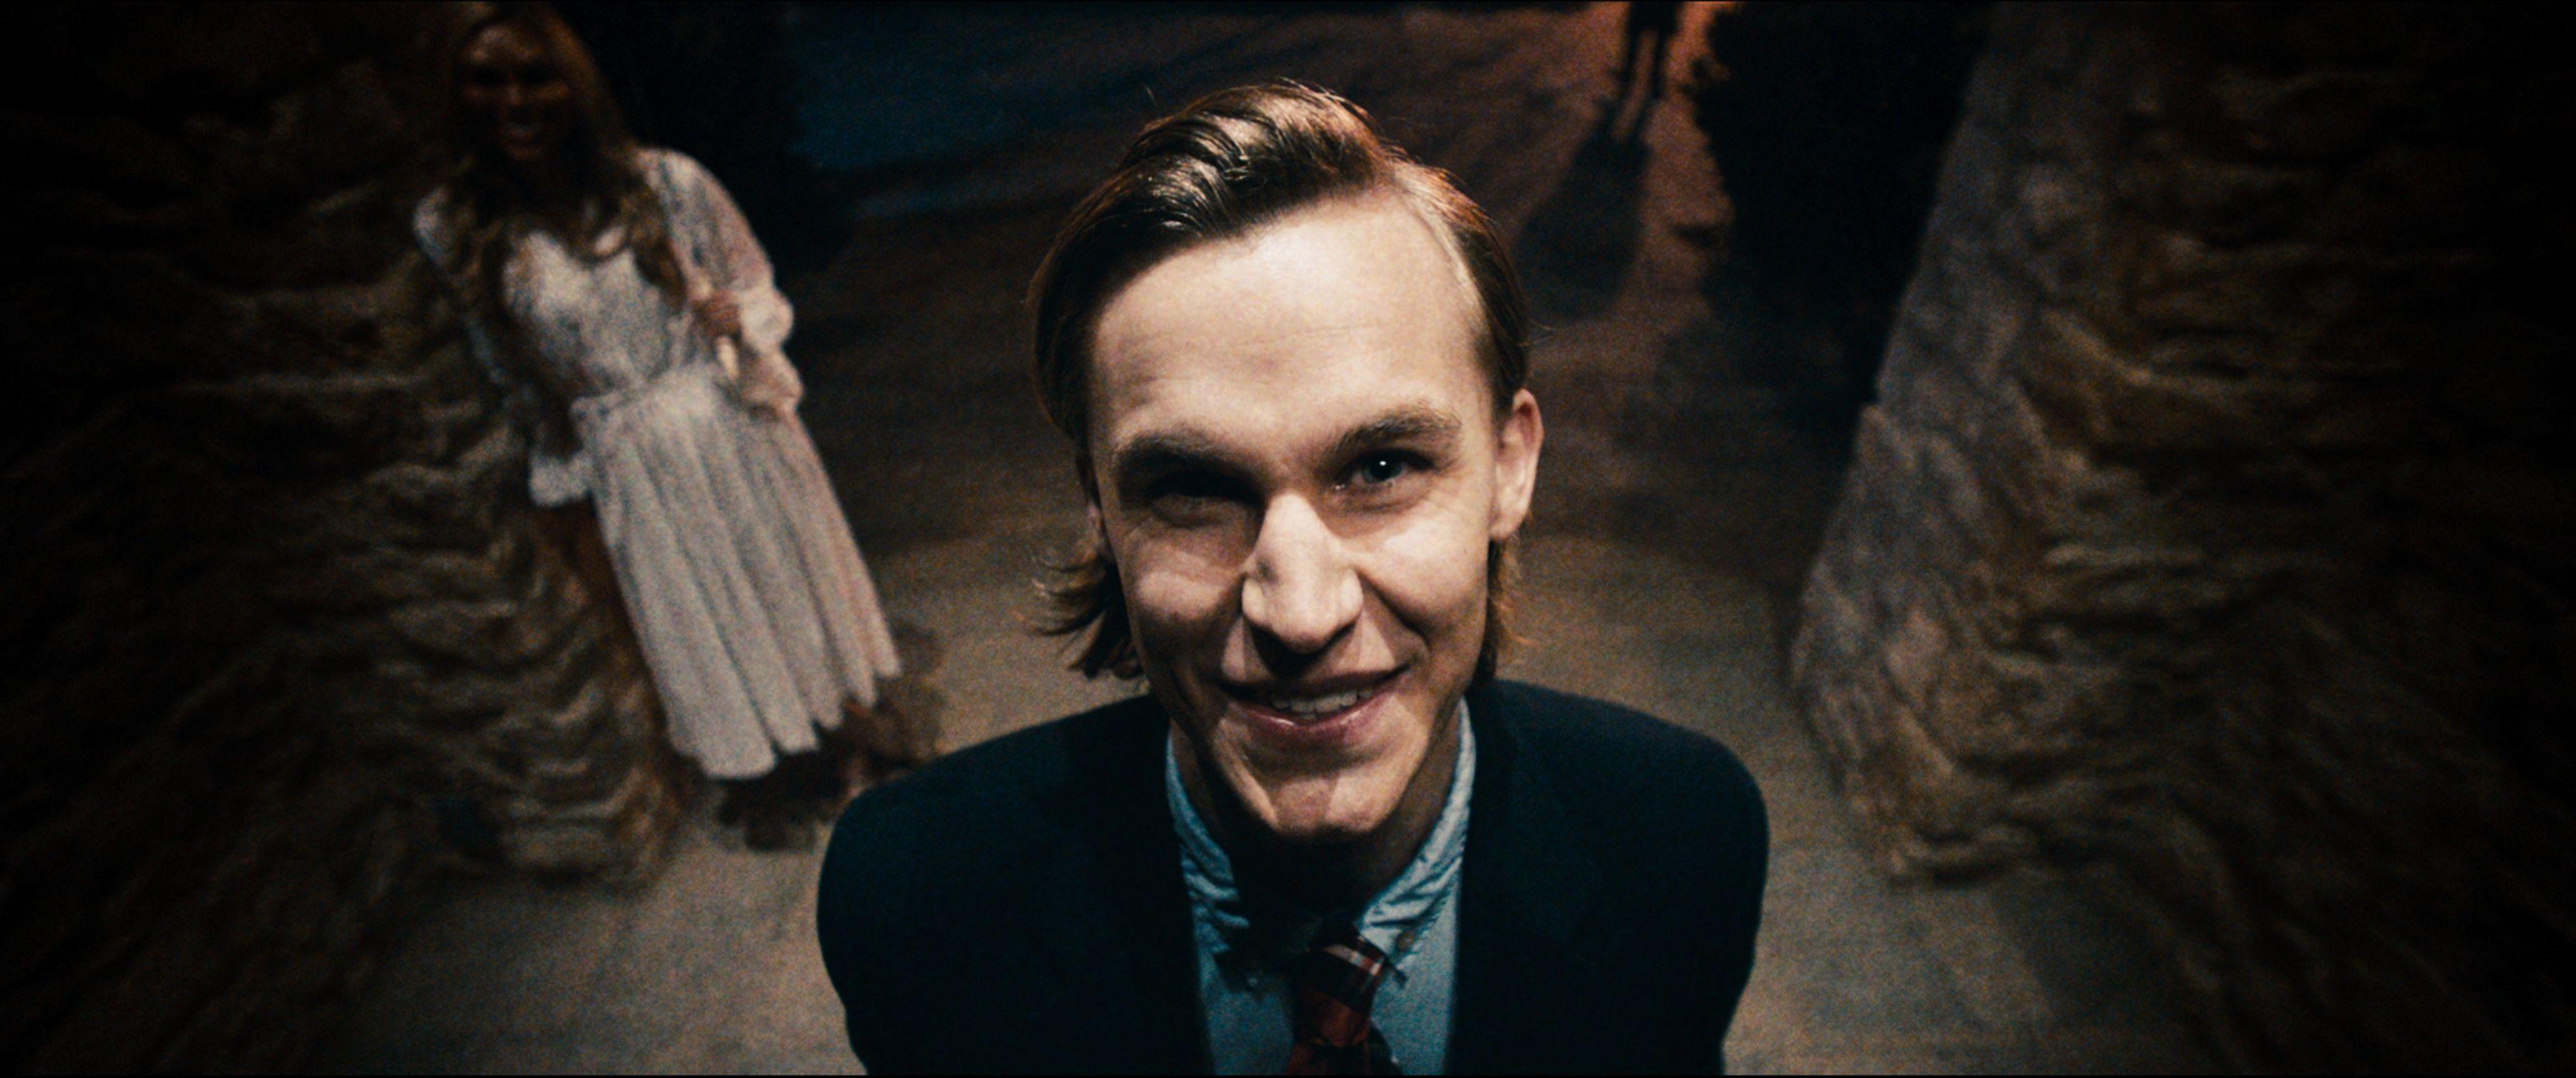 THE PURGE Trailer, Poster, and Image. THE PURGE Stars Ethan Hawke